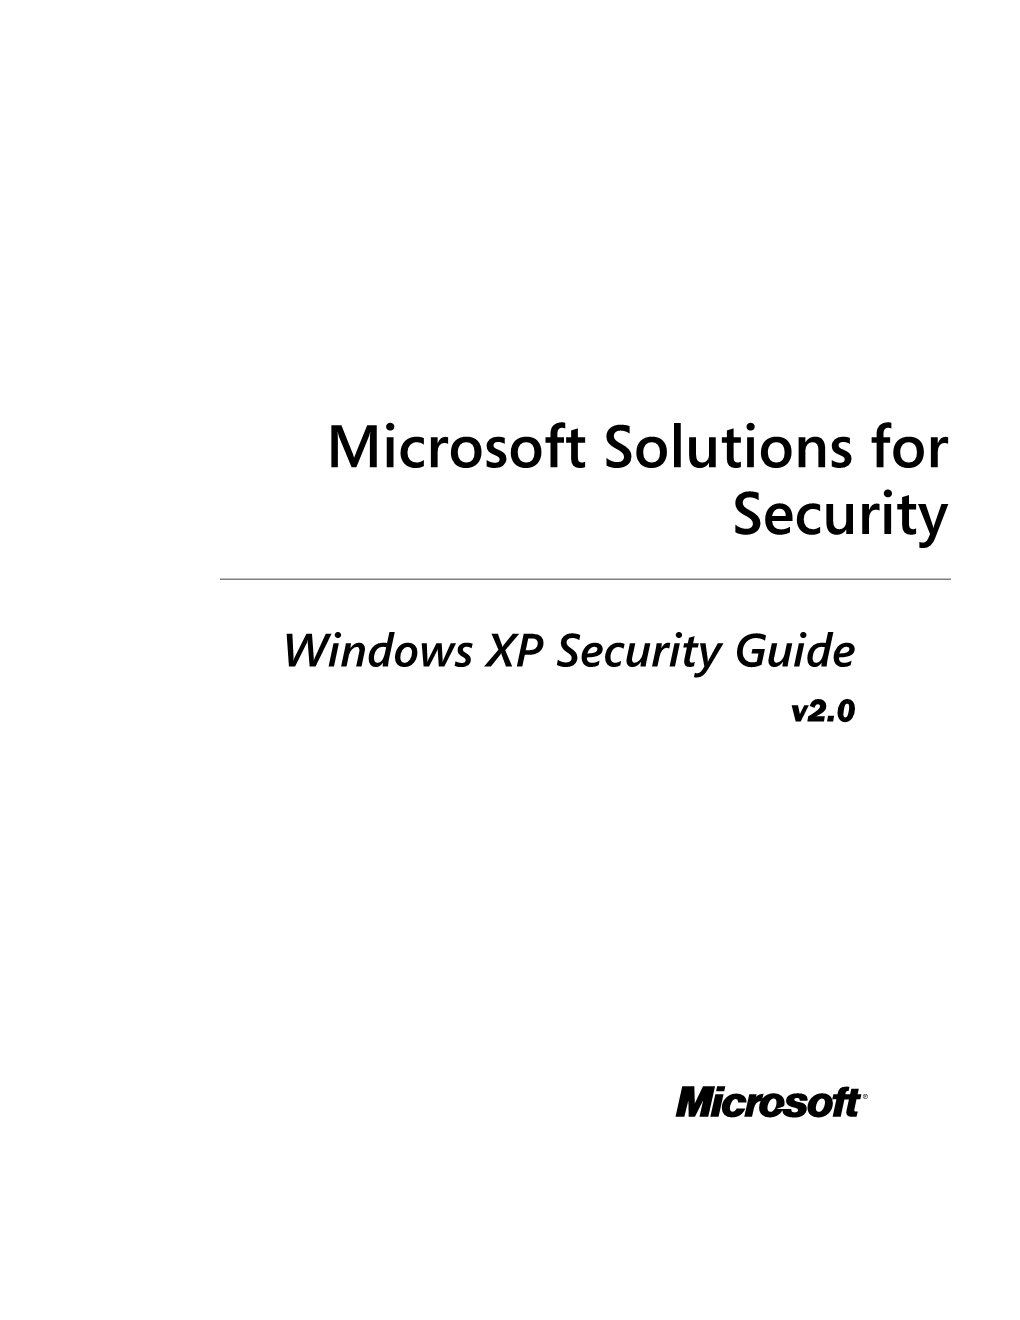 Microsoft Solutions for Security Group (MSS) Would Like to Acknowledge and Thank the Team That Produced the Windows XP Security Guide